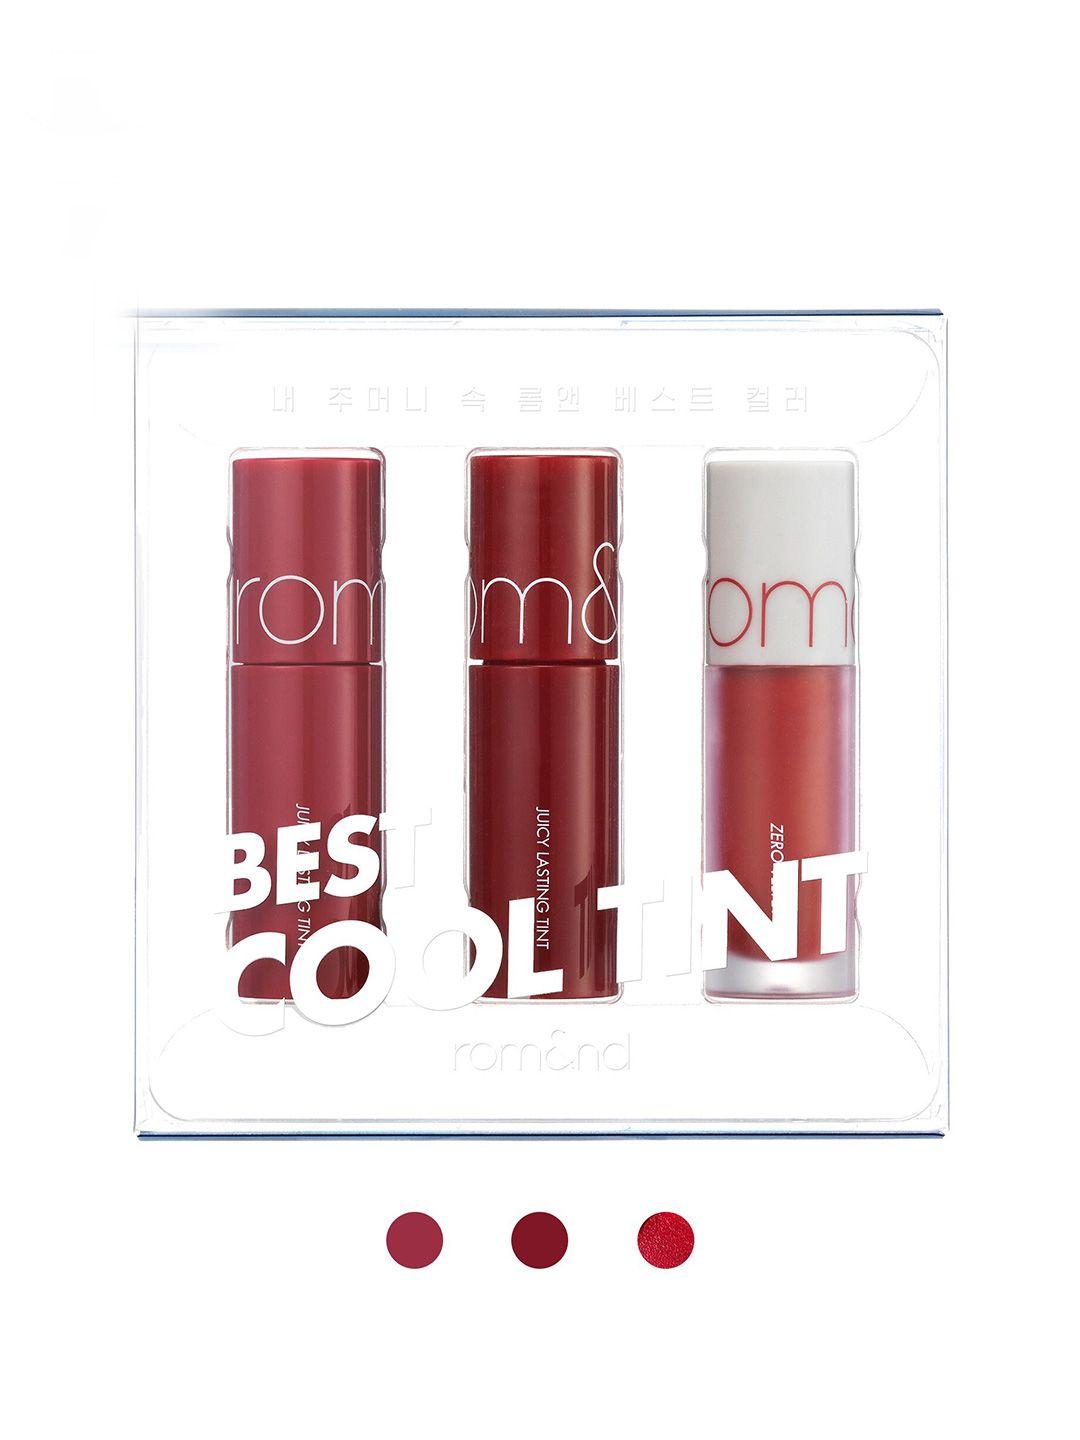 rom&nd best cooltone set of 3 tint 2g each - fizz - figfig - cherry bomb